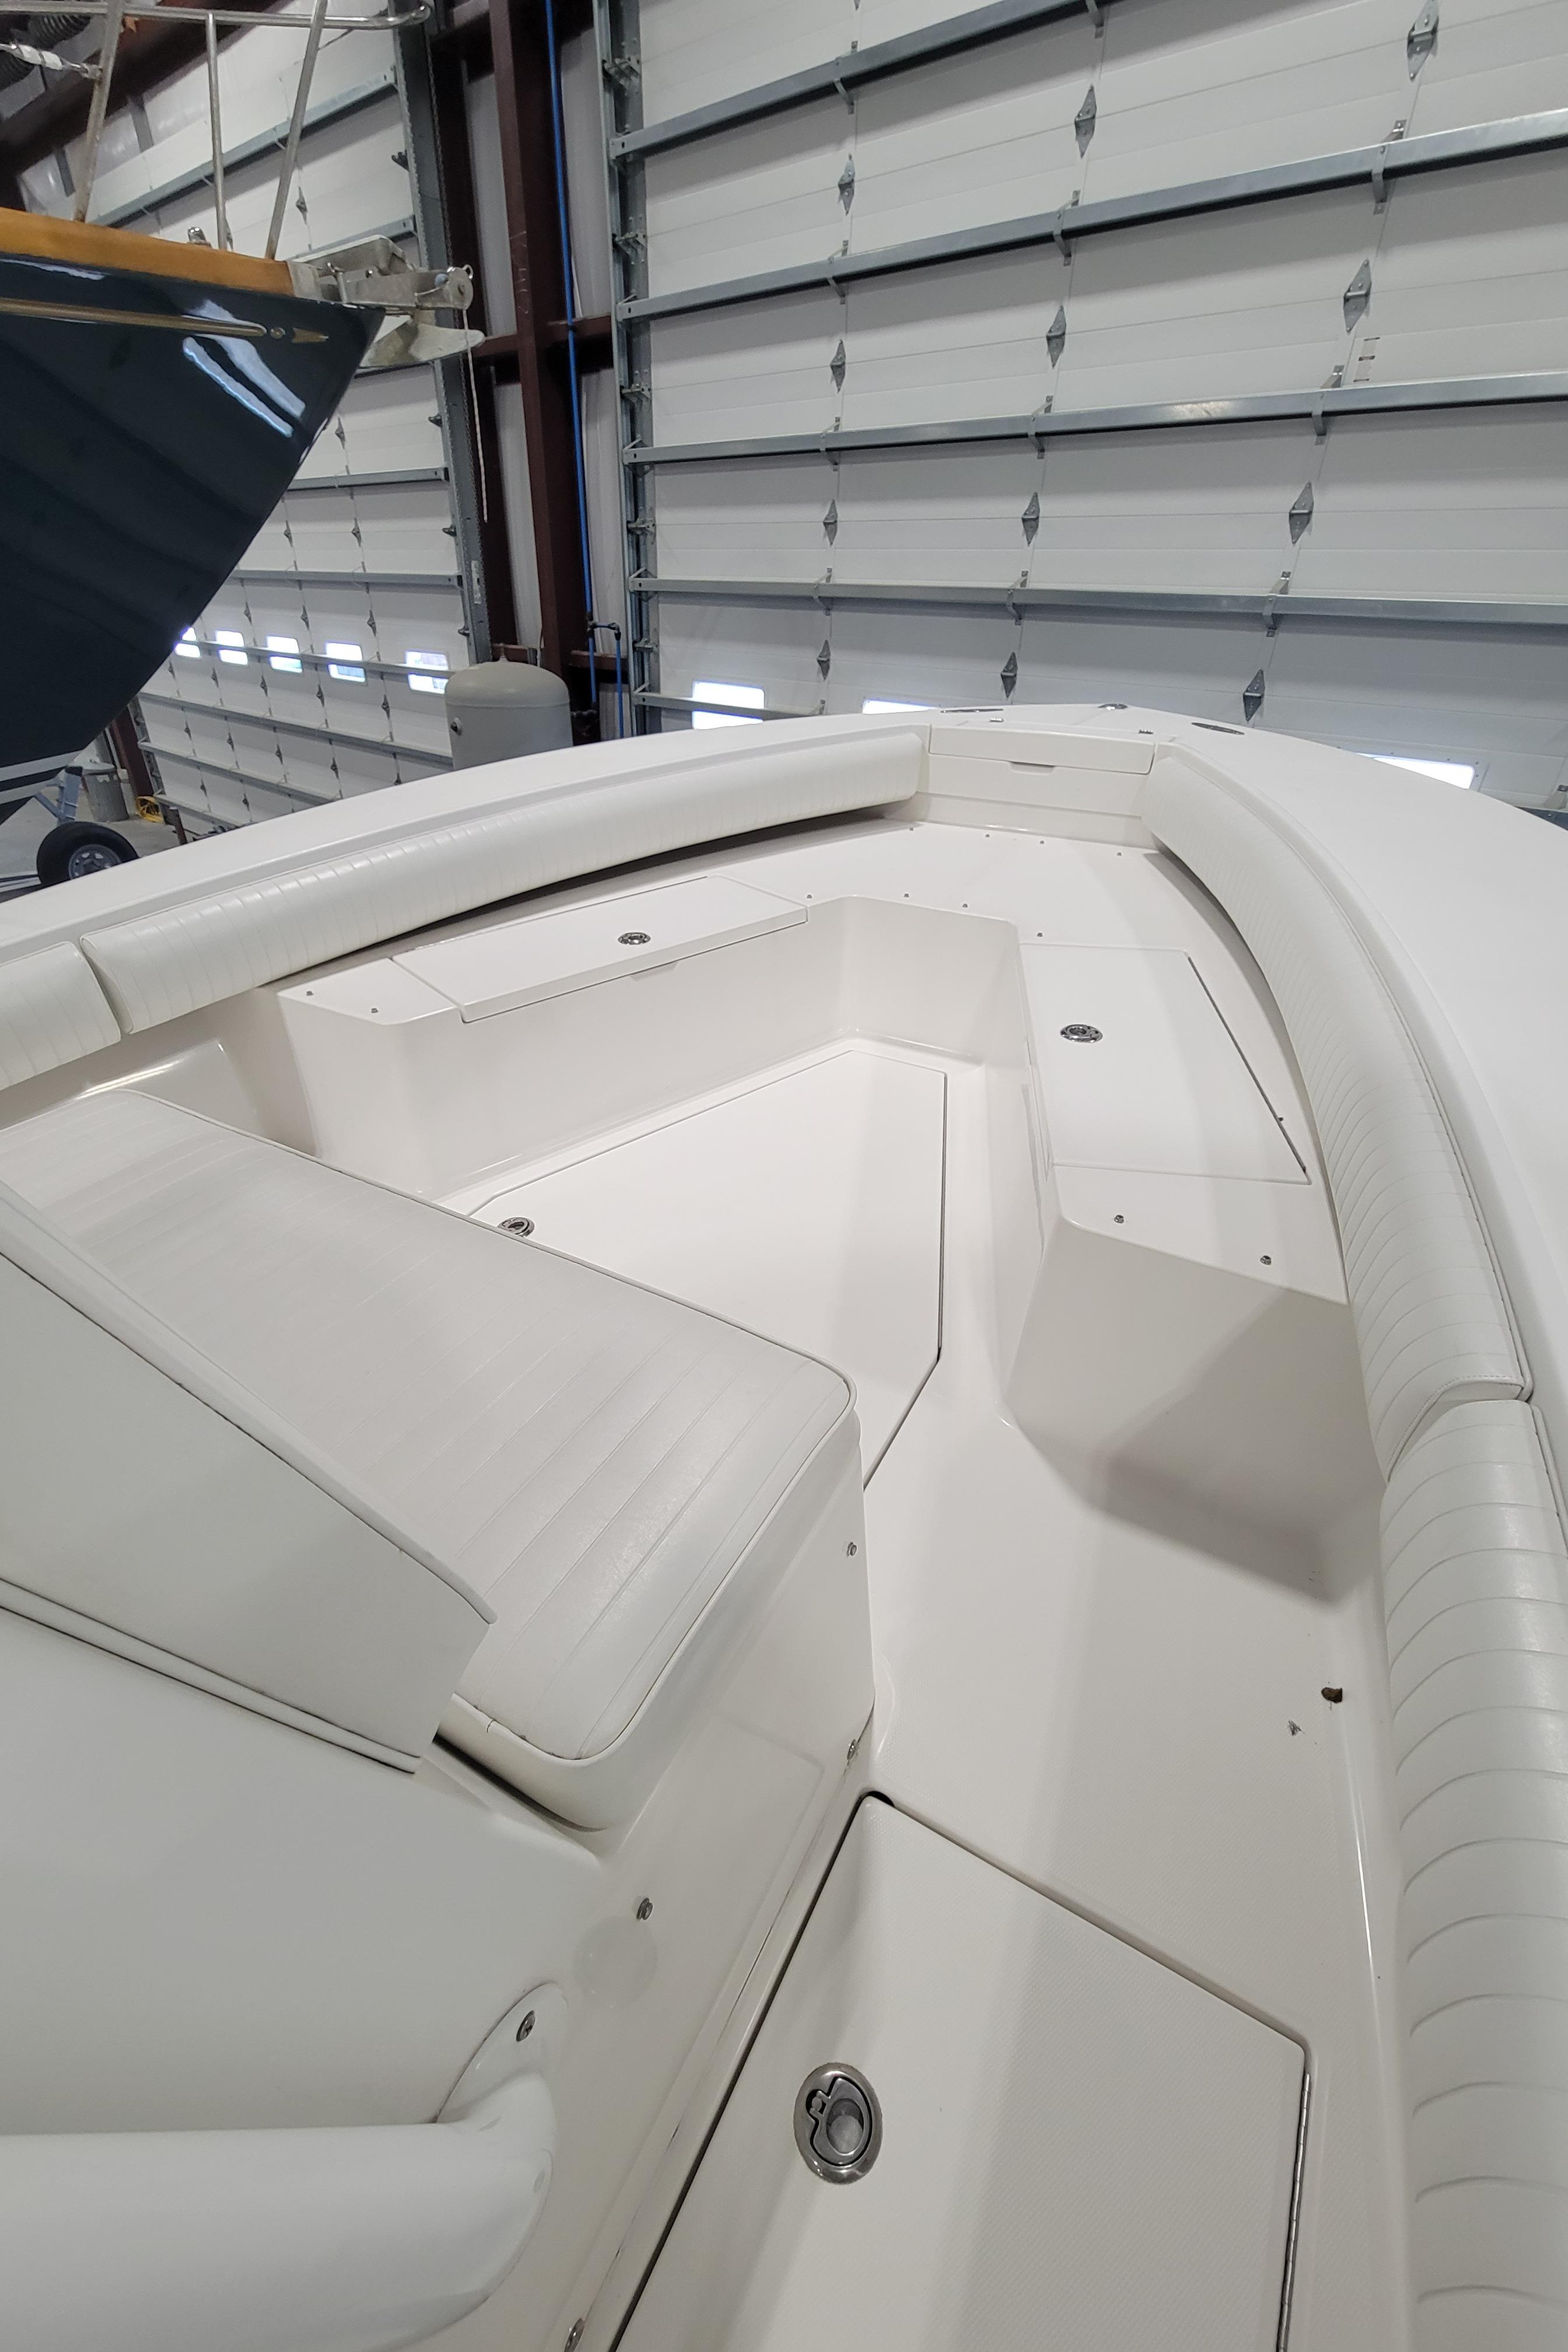 O'Sullivans Marine - O'SULLIVAN'S MARINE LAUNCH NEW RANGE OF BOAT SEATS FOR  THE IRISH MARKET Comfort is a primary concern when selecting the right boat  seats. Whatever your boat seat needs, rest